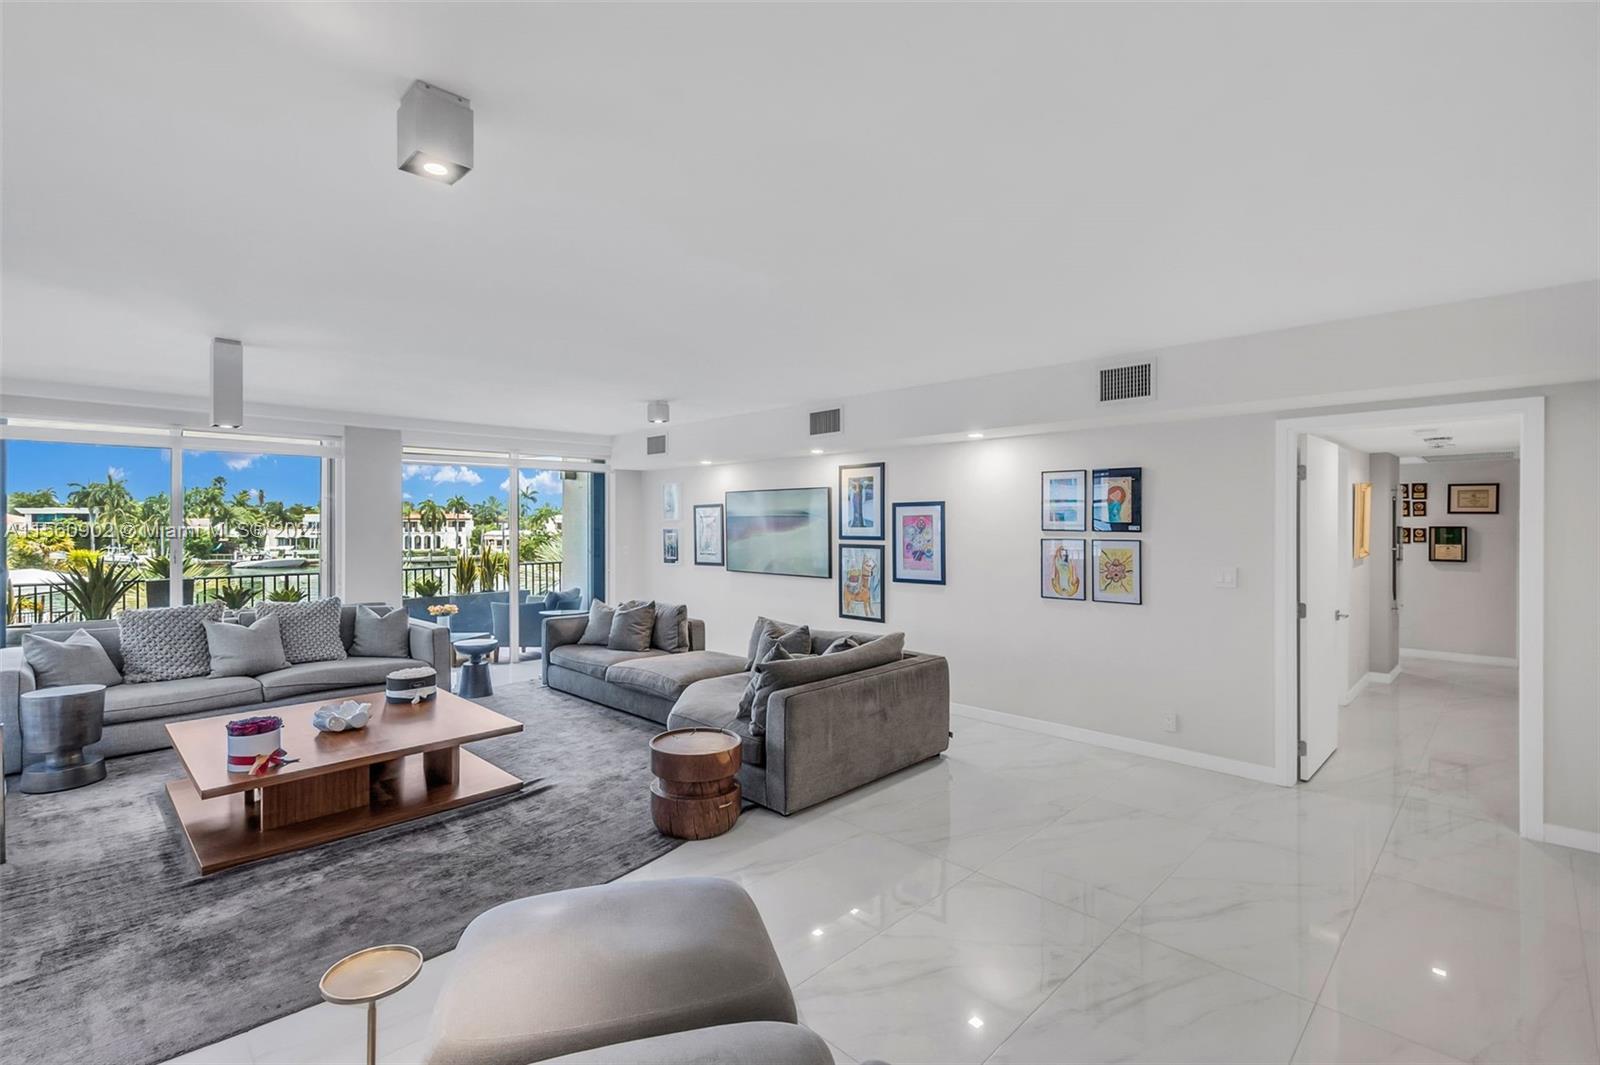 Enjoy this dream oasis in the heart of Miami Beach! Stunning corner condo with exclusive waterfront 